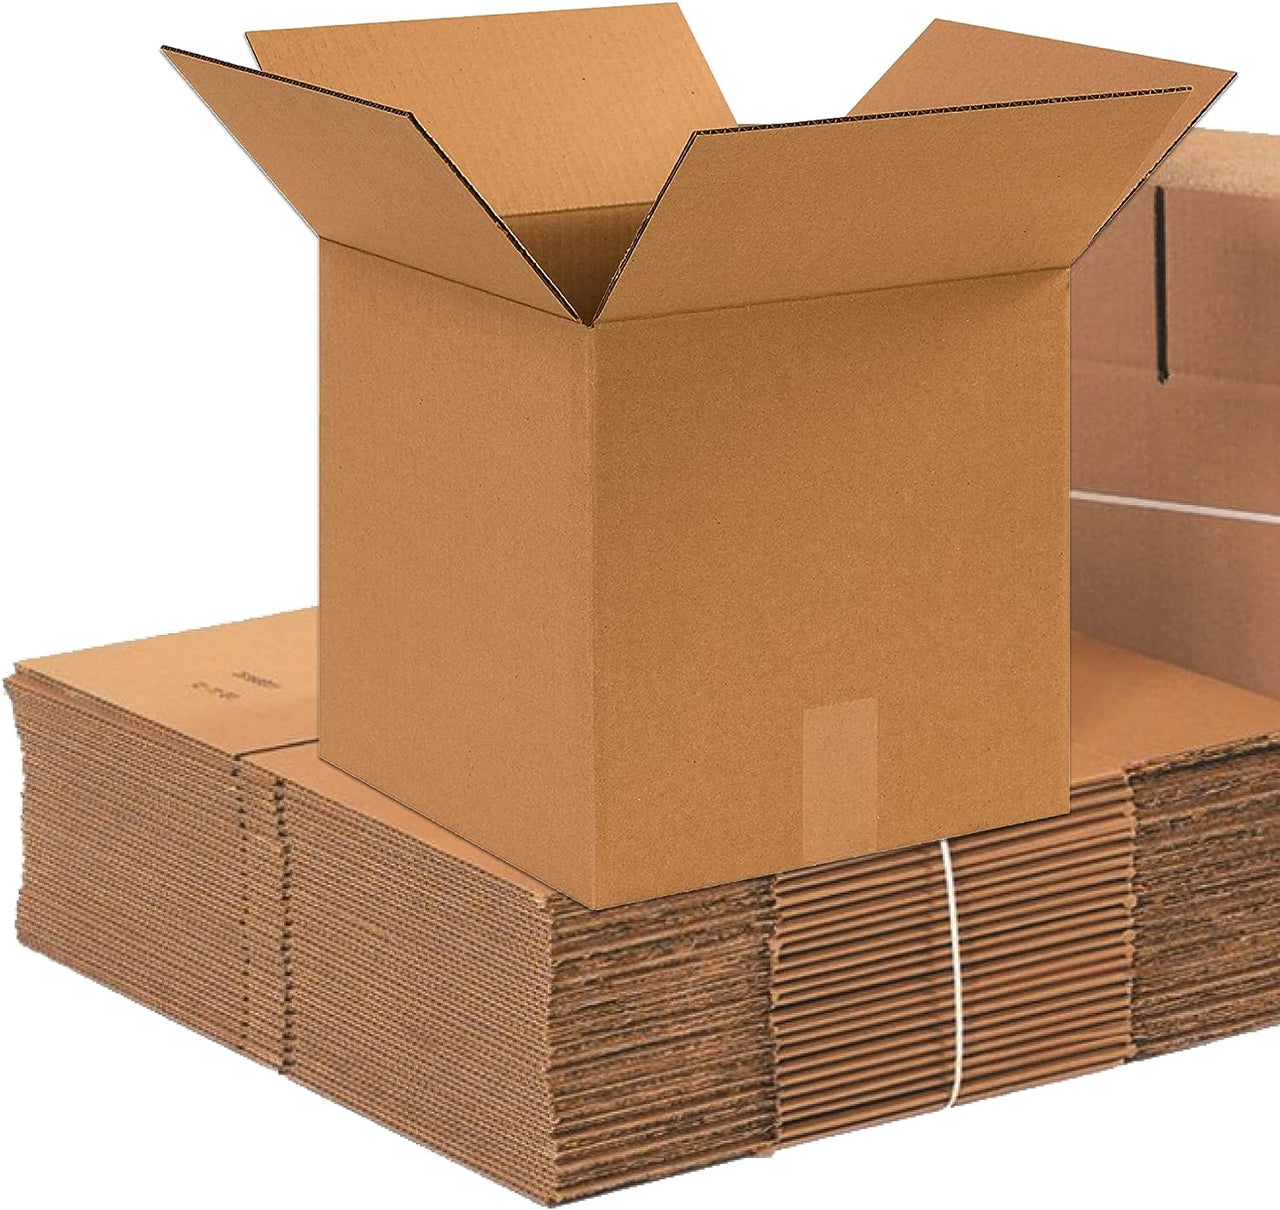 Shipping Boxes 18"L x 18"W x 18"H 10-Pack Corrugated Cardboard Box for Packing Moving Storage